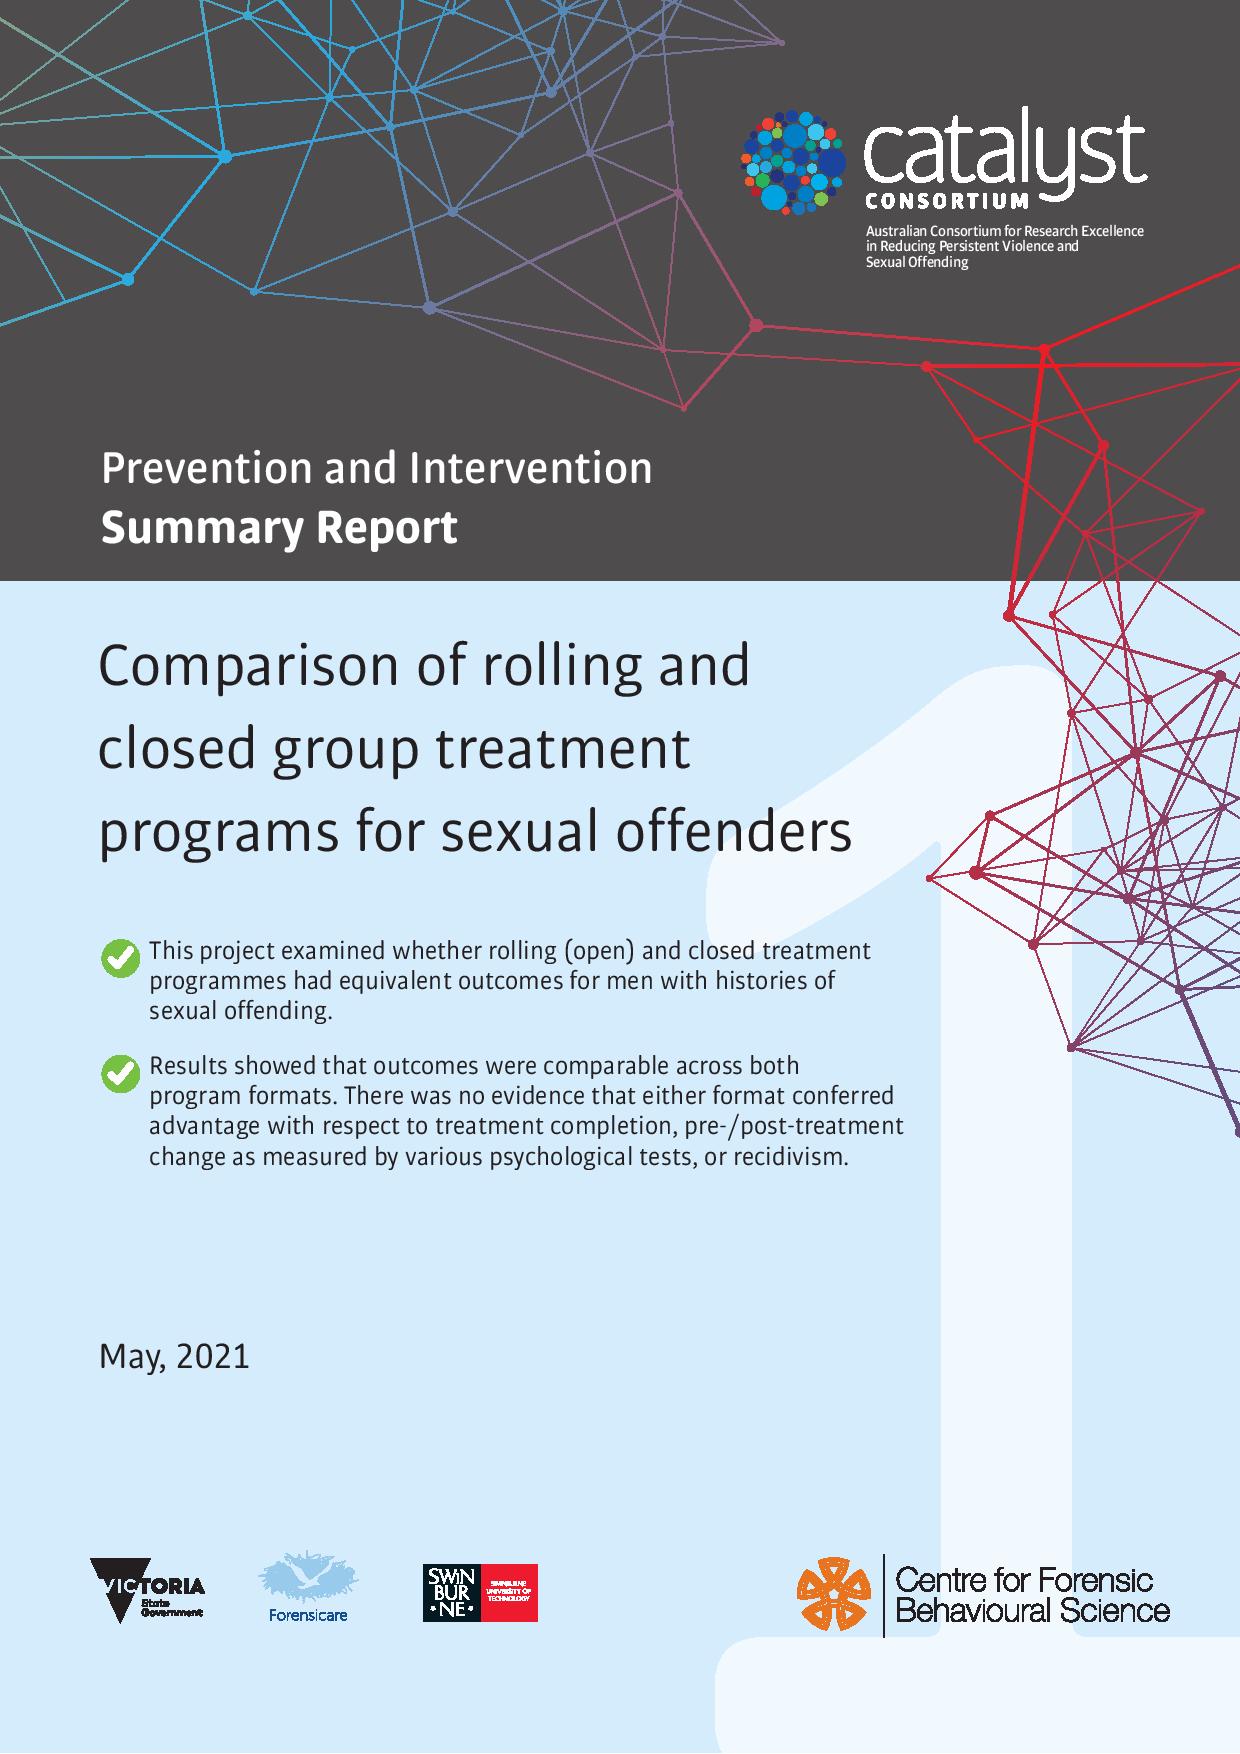 Comparison of rolling and closed group treatment programs for sexual offenders